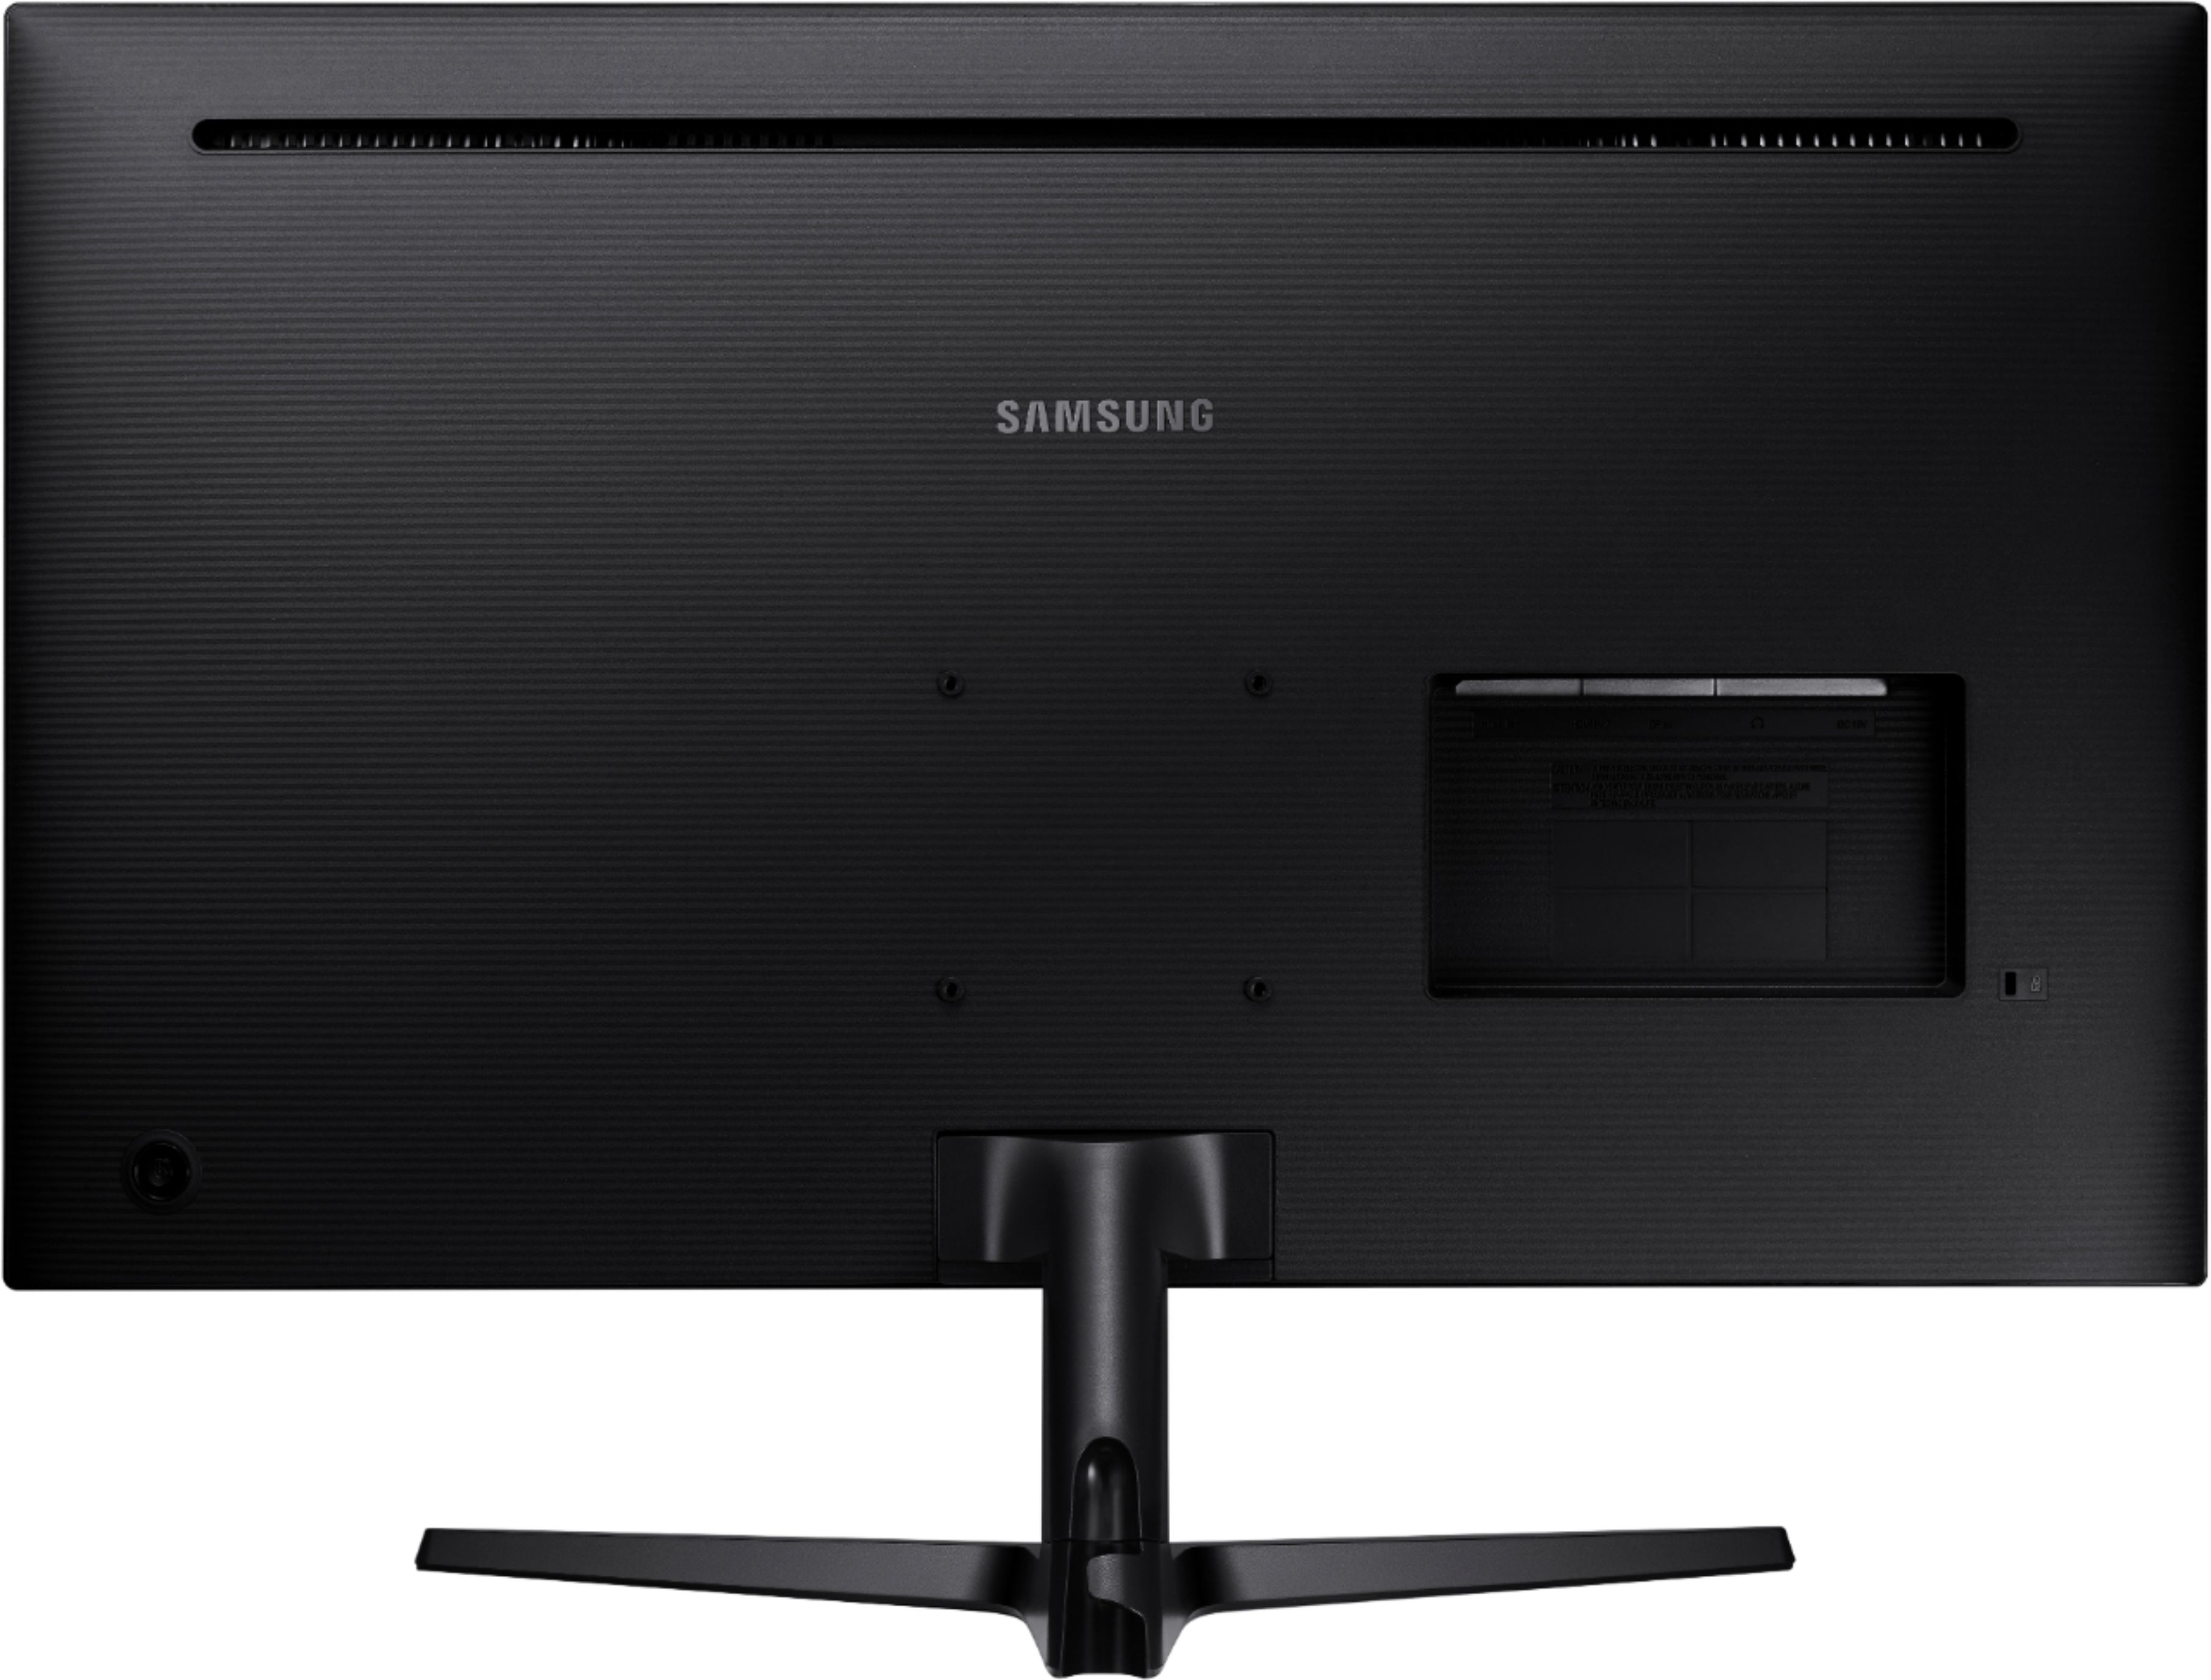 Back View: Samsung - Geek Squad Certified Refurbished 49" LED Curved FHD FreeSync Monitor with HDR - Matte Dark Blue/Black